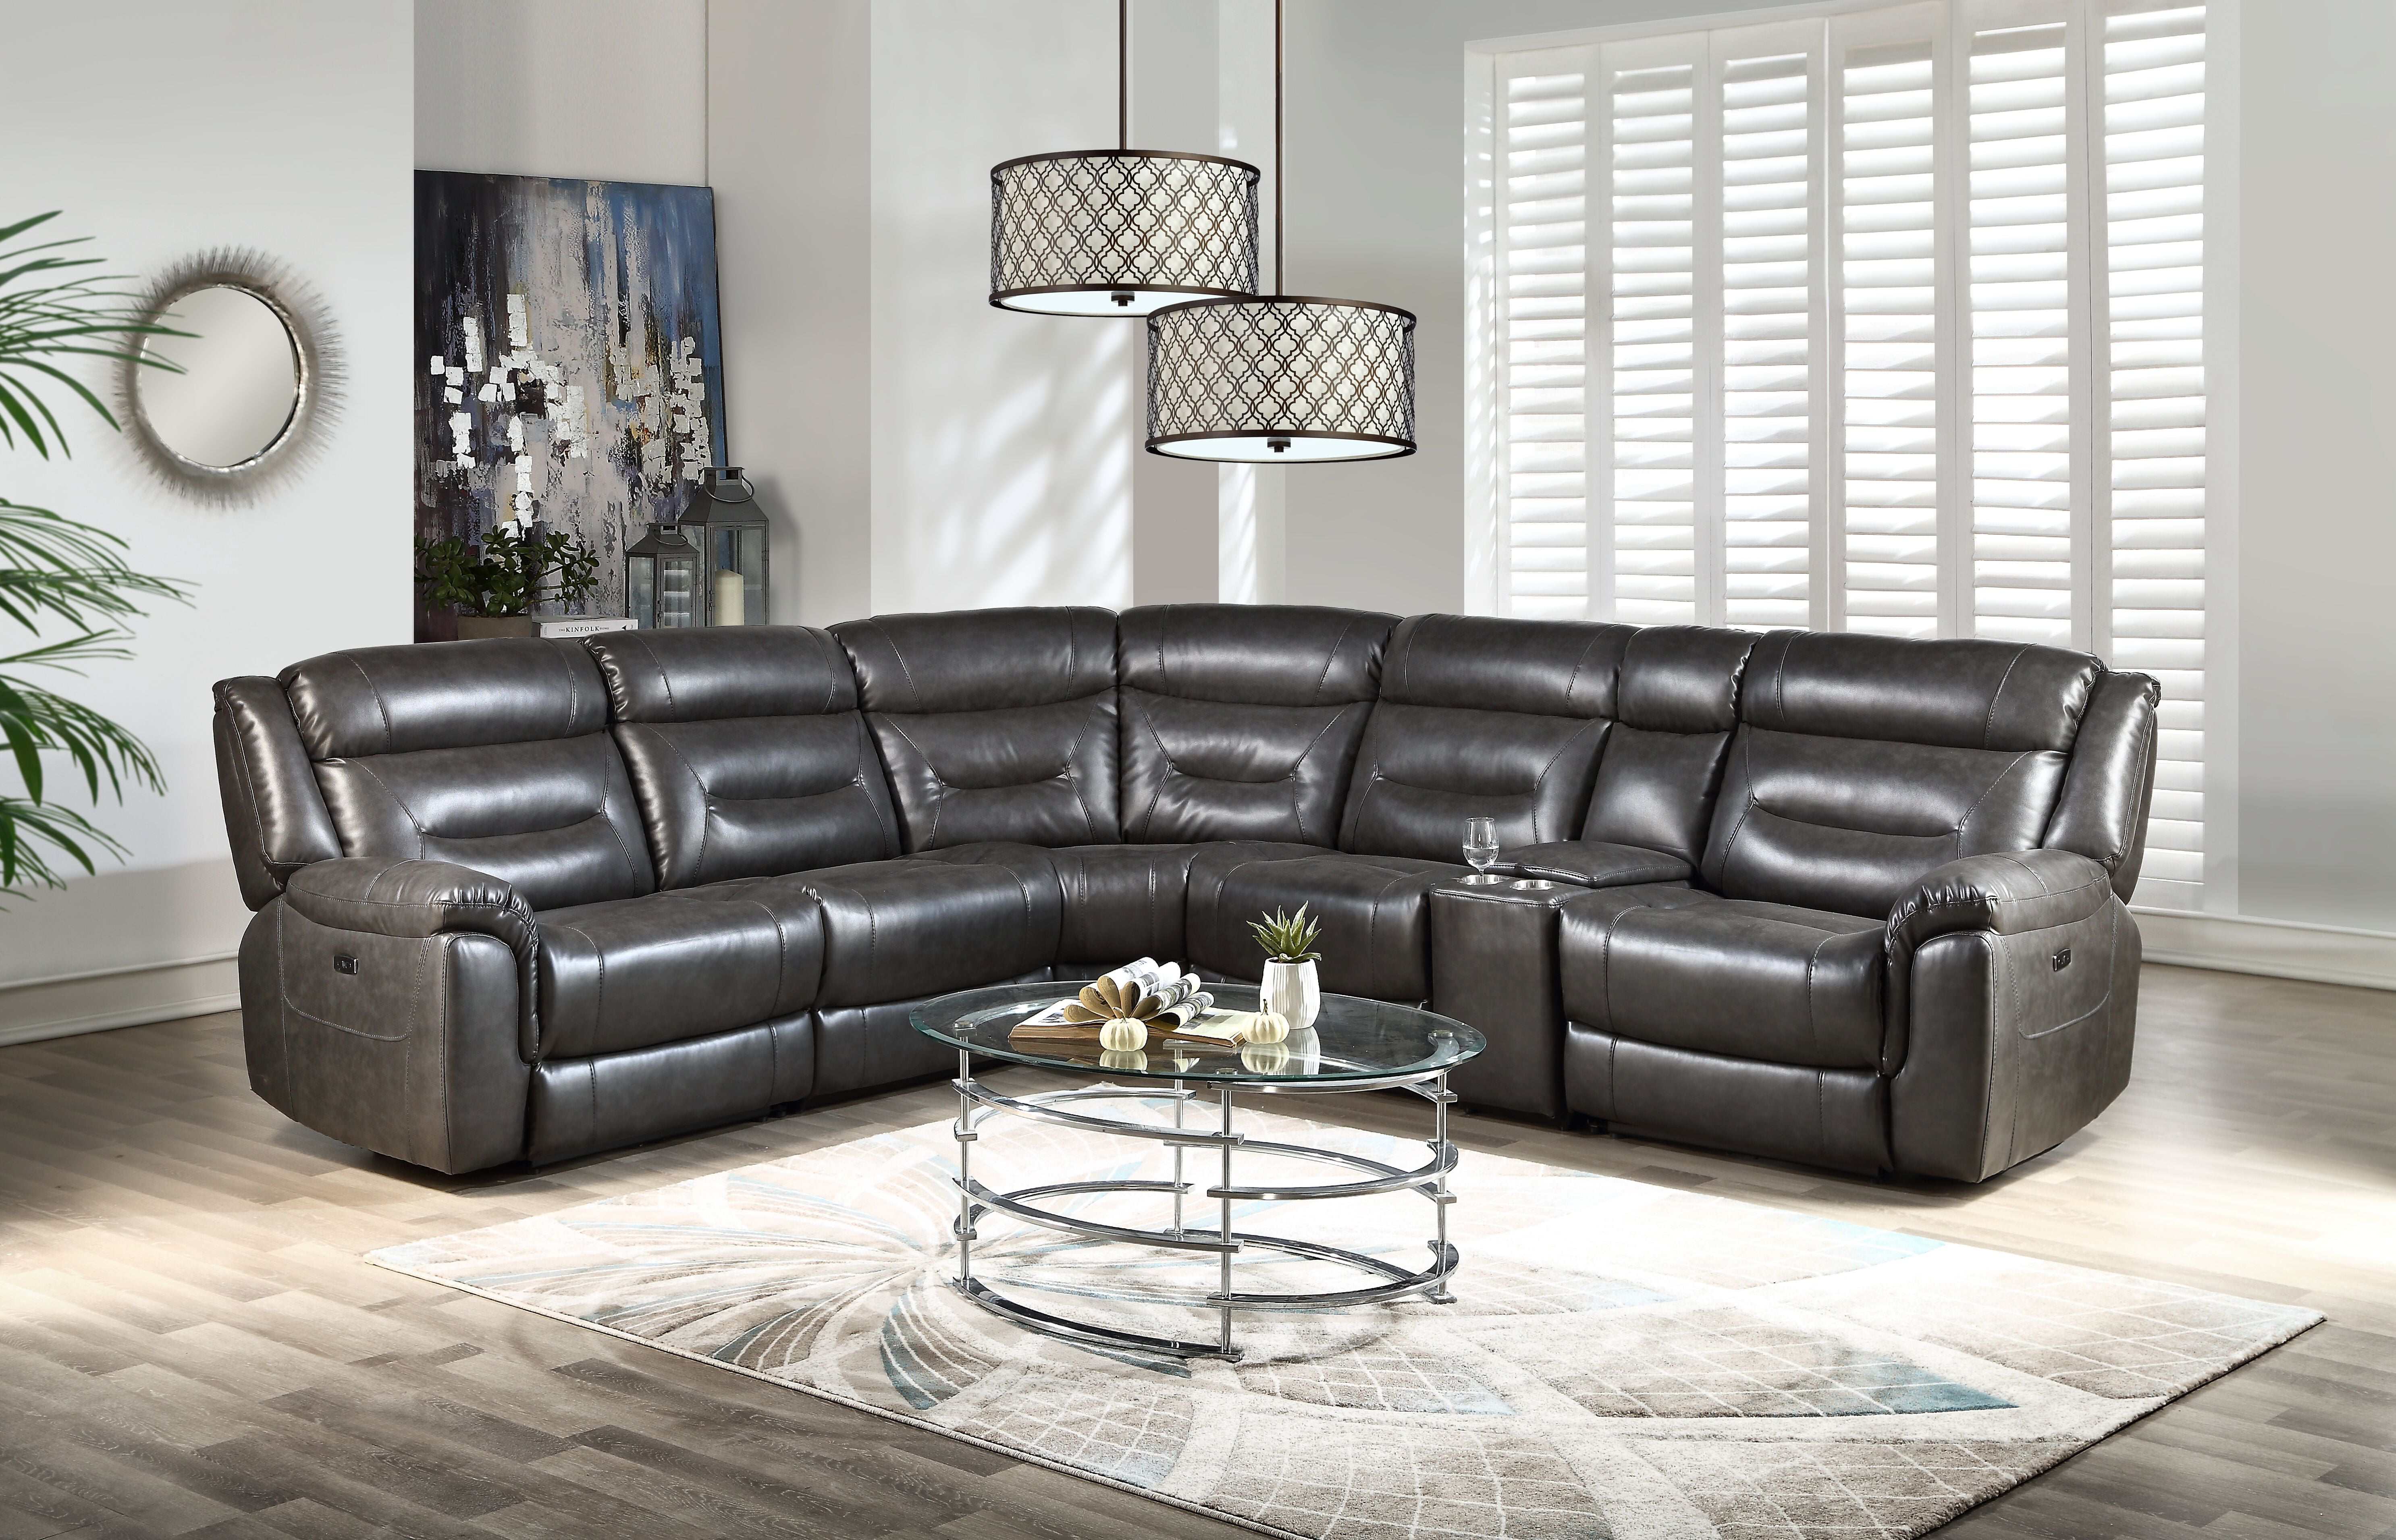 Acme Imogen Wooden Frame Sectional Sofa in Leather-Aire - Walmart.com